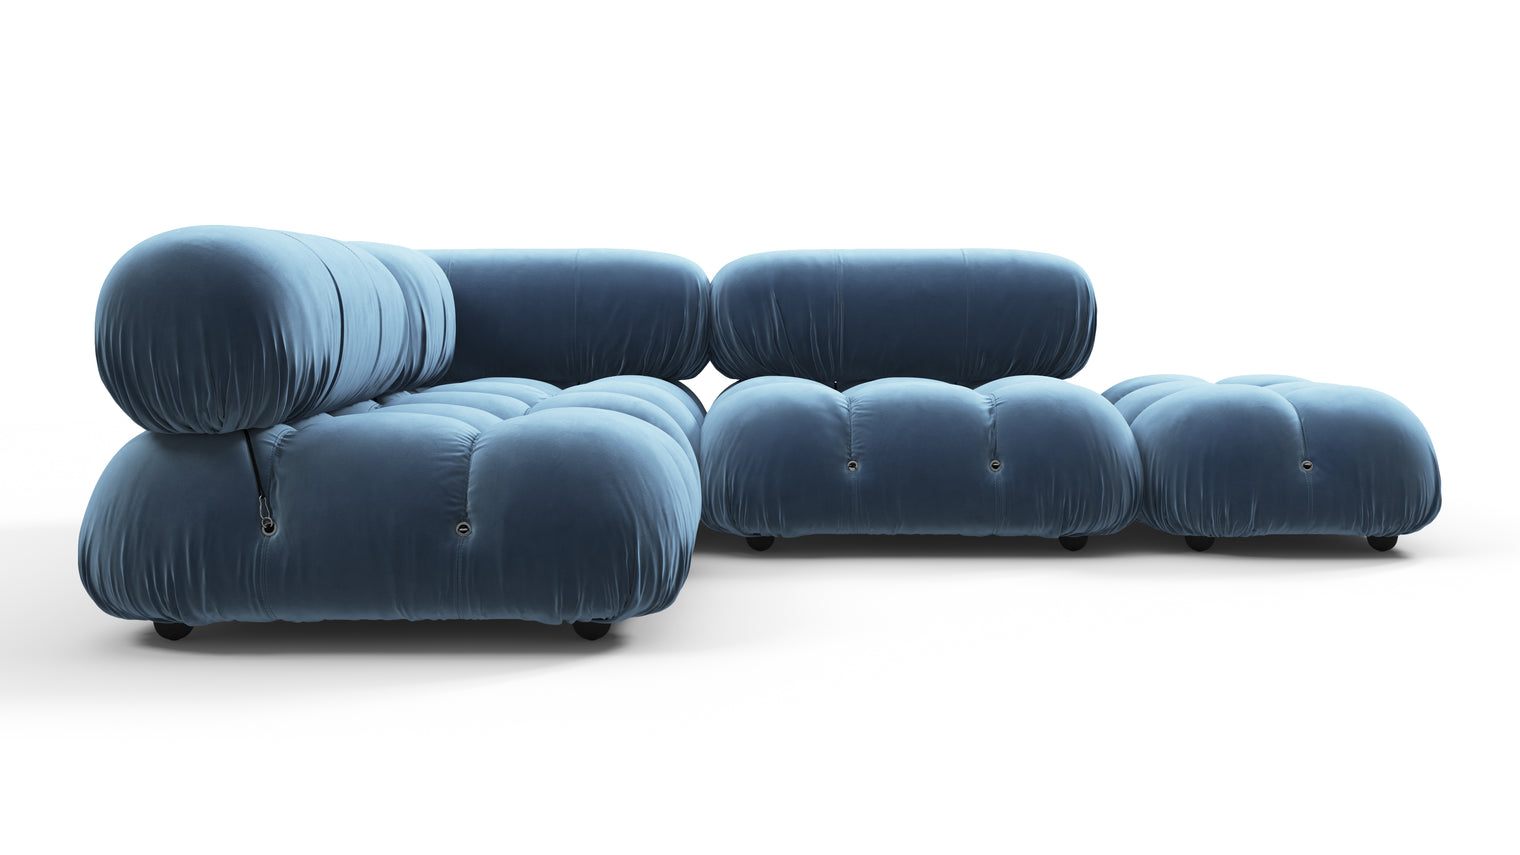 Stylish Sectional | With the Belia’s sectional design, you can create a sofa that suits your space. The soft curves of each carefully crafted cushion create a luxurious and comfortable seat for the ultimate in stylish comfort.
